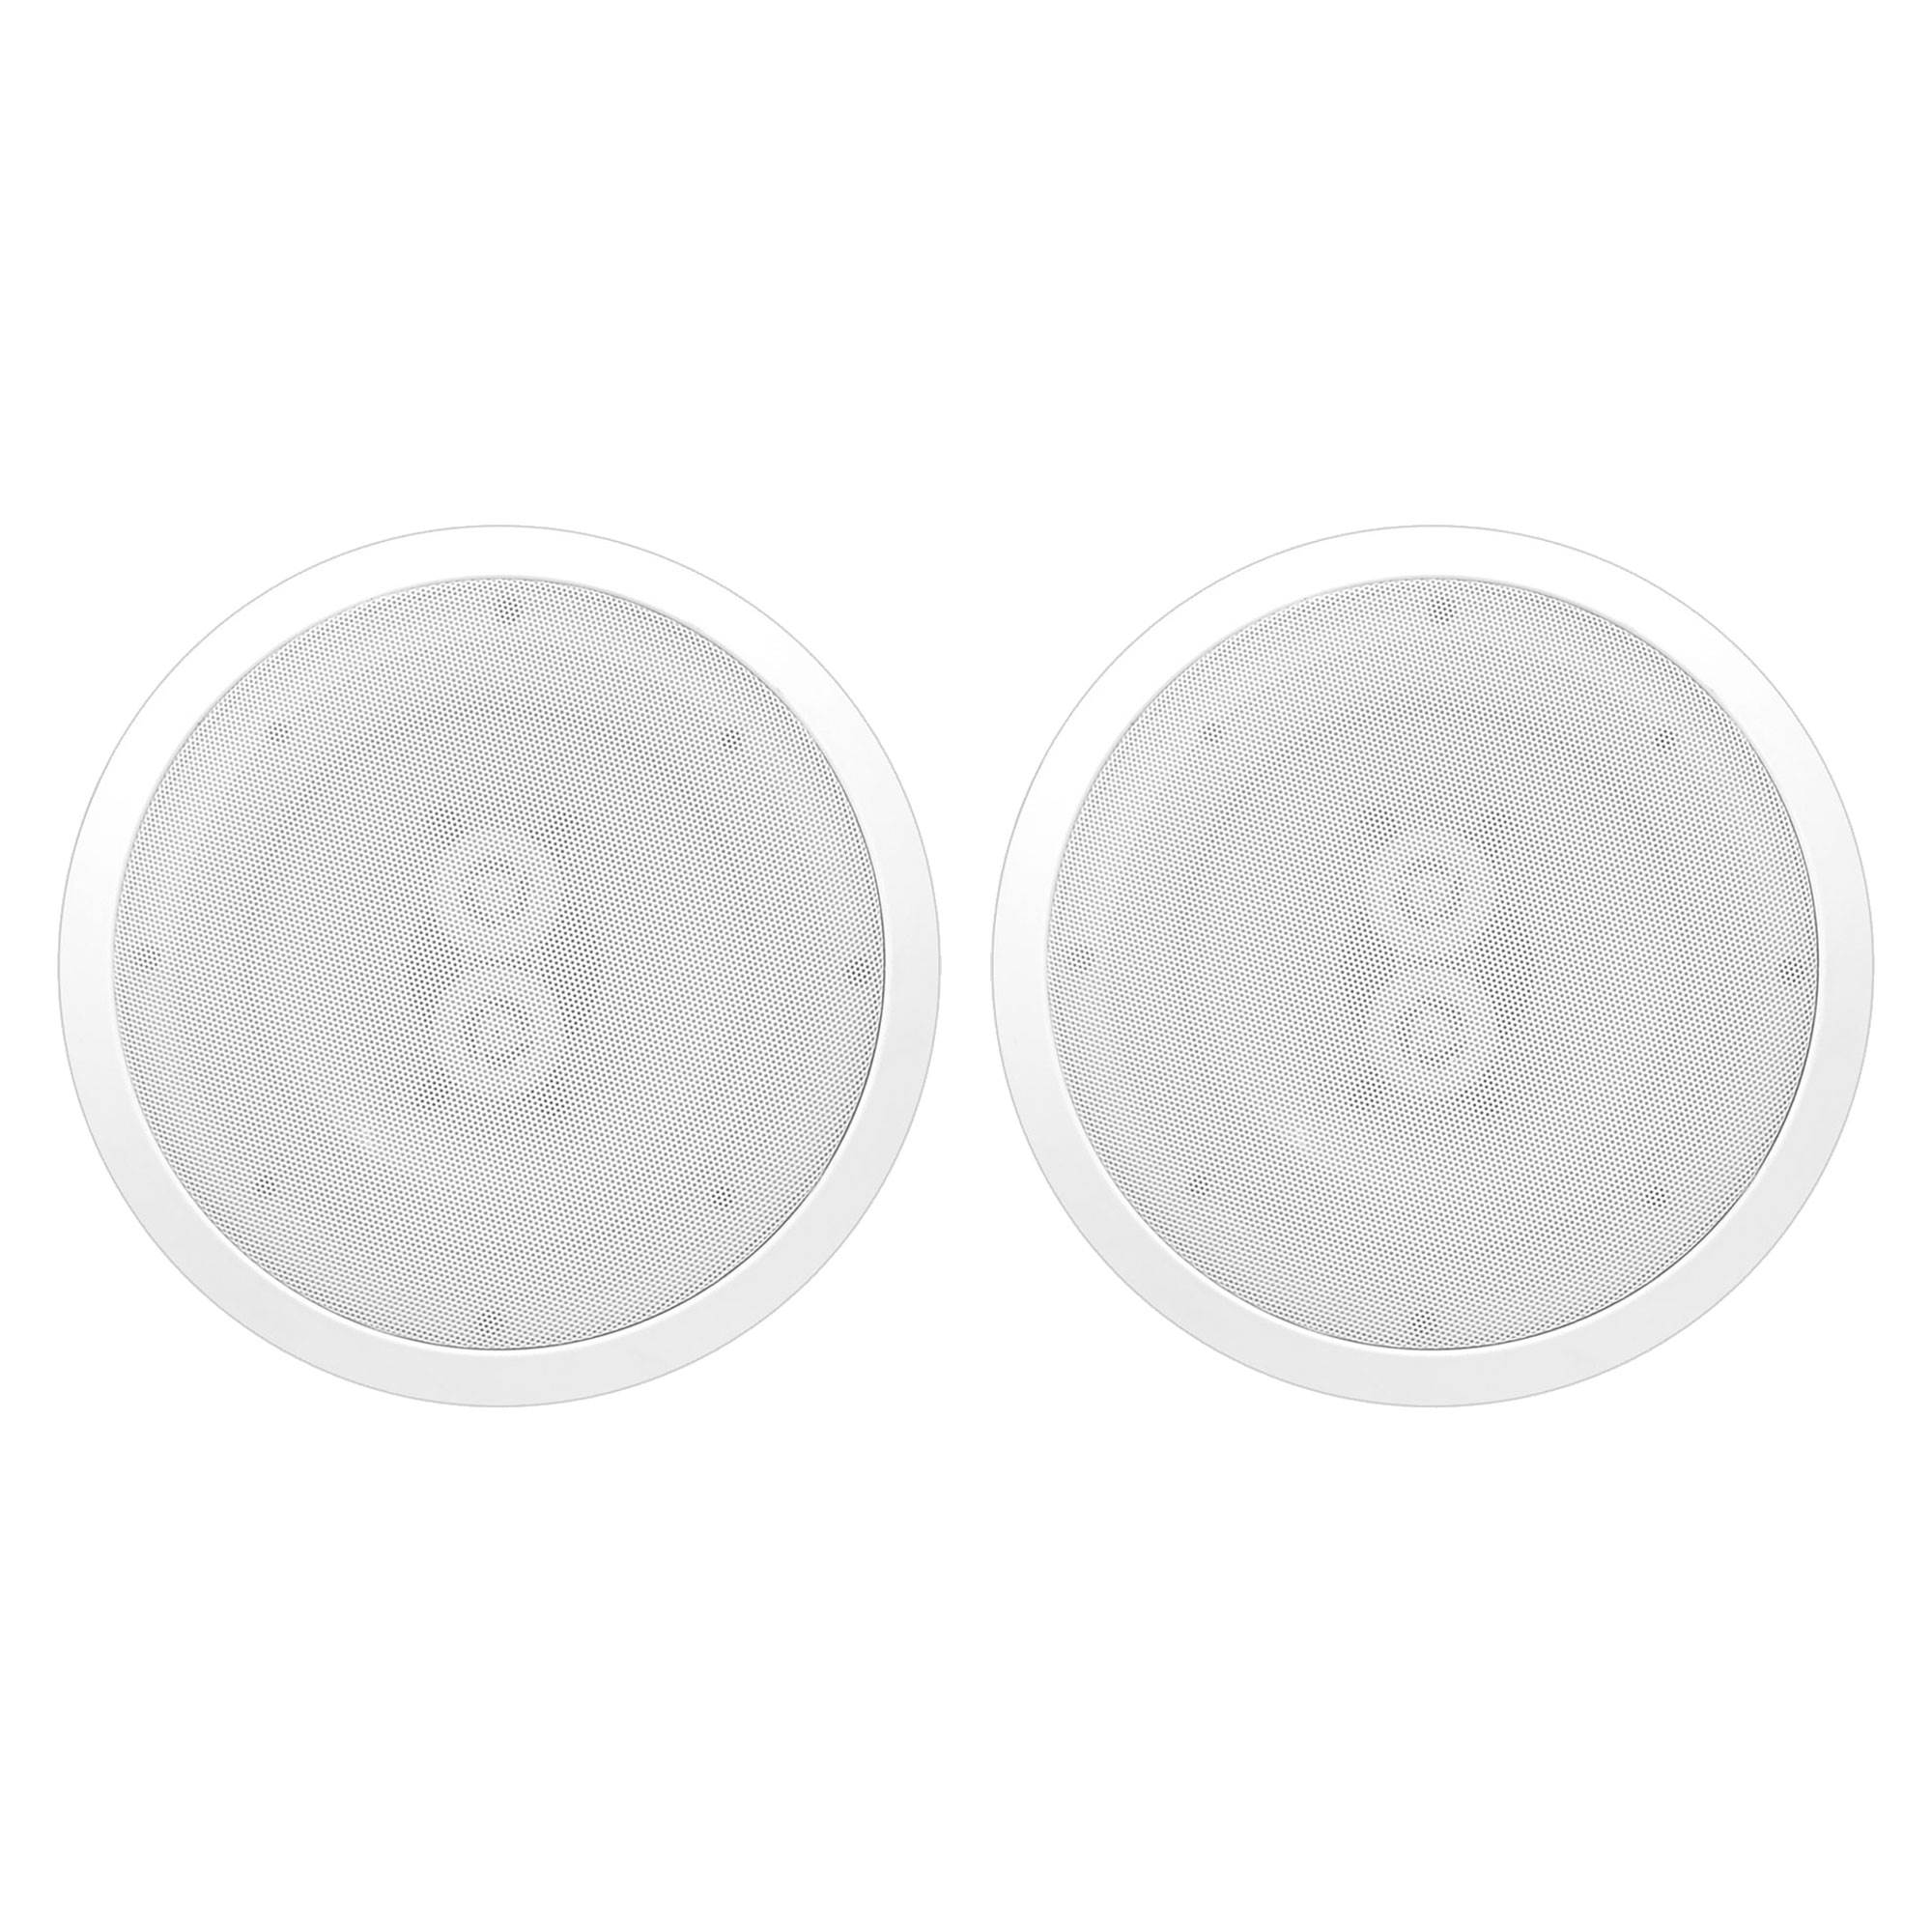 Pyle 5.25 Inch 200W Outdoor Ceiling Home Audio In-Wall Stereo Speaker (2 Pack) - image 1 of 5